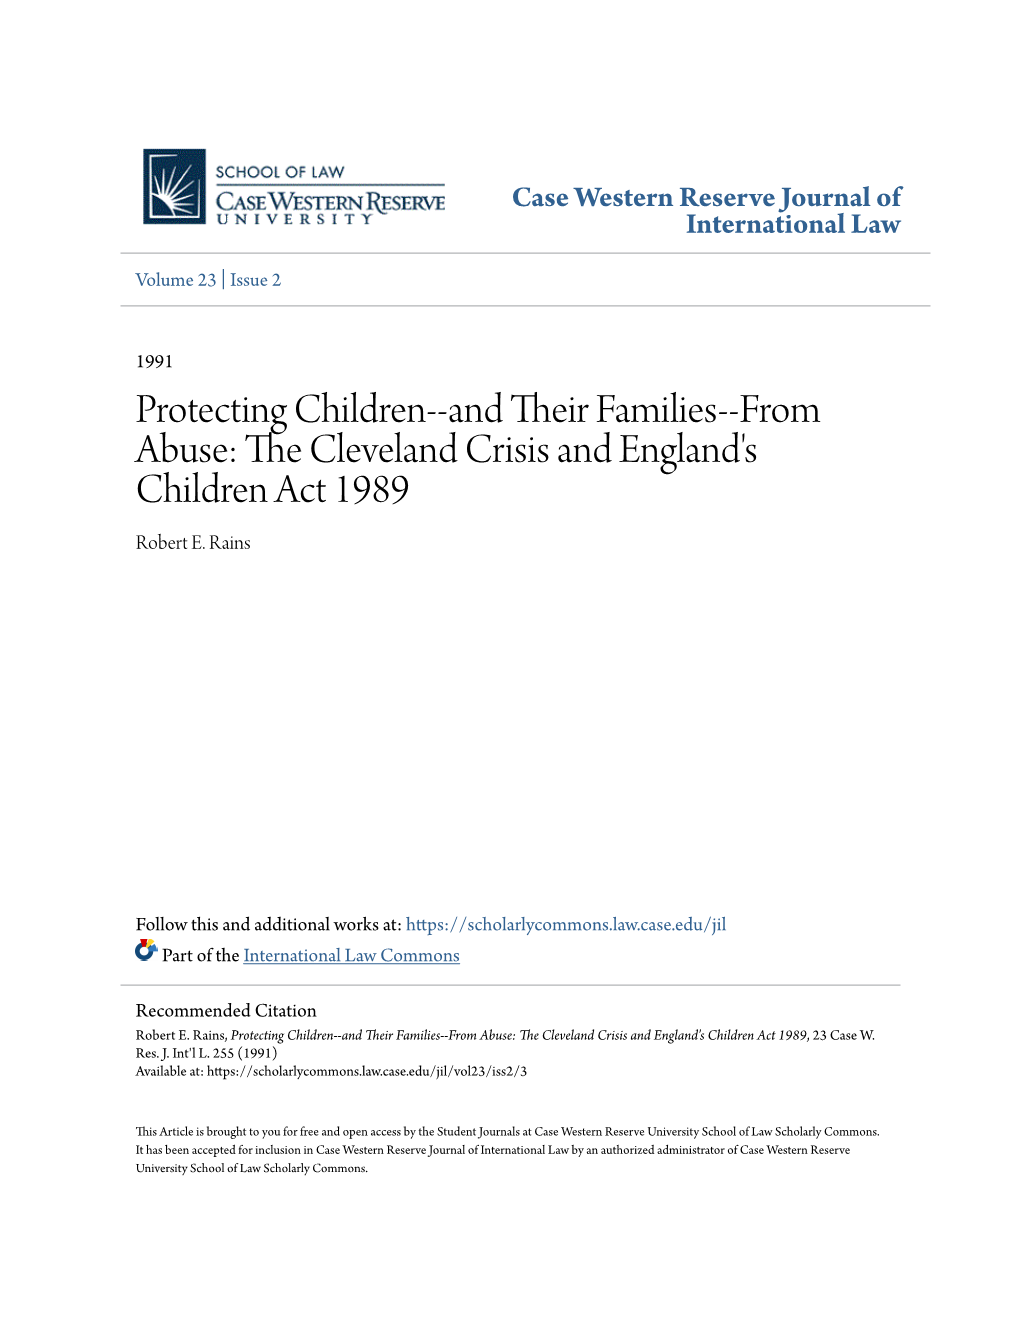 From Abuse: the Cleveland Crisis and England's Children Act 1989, 23 Case W